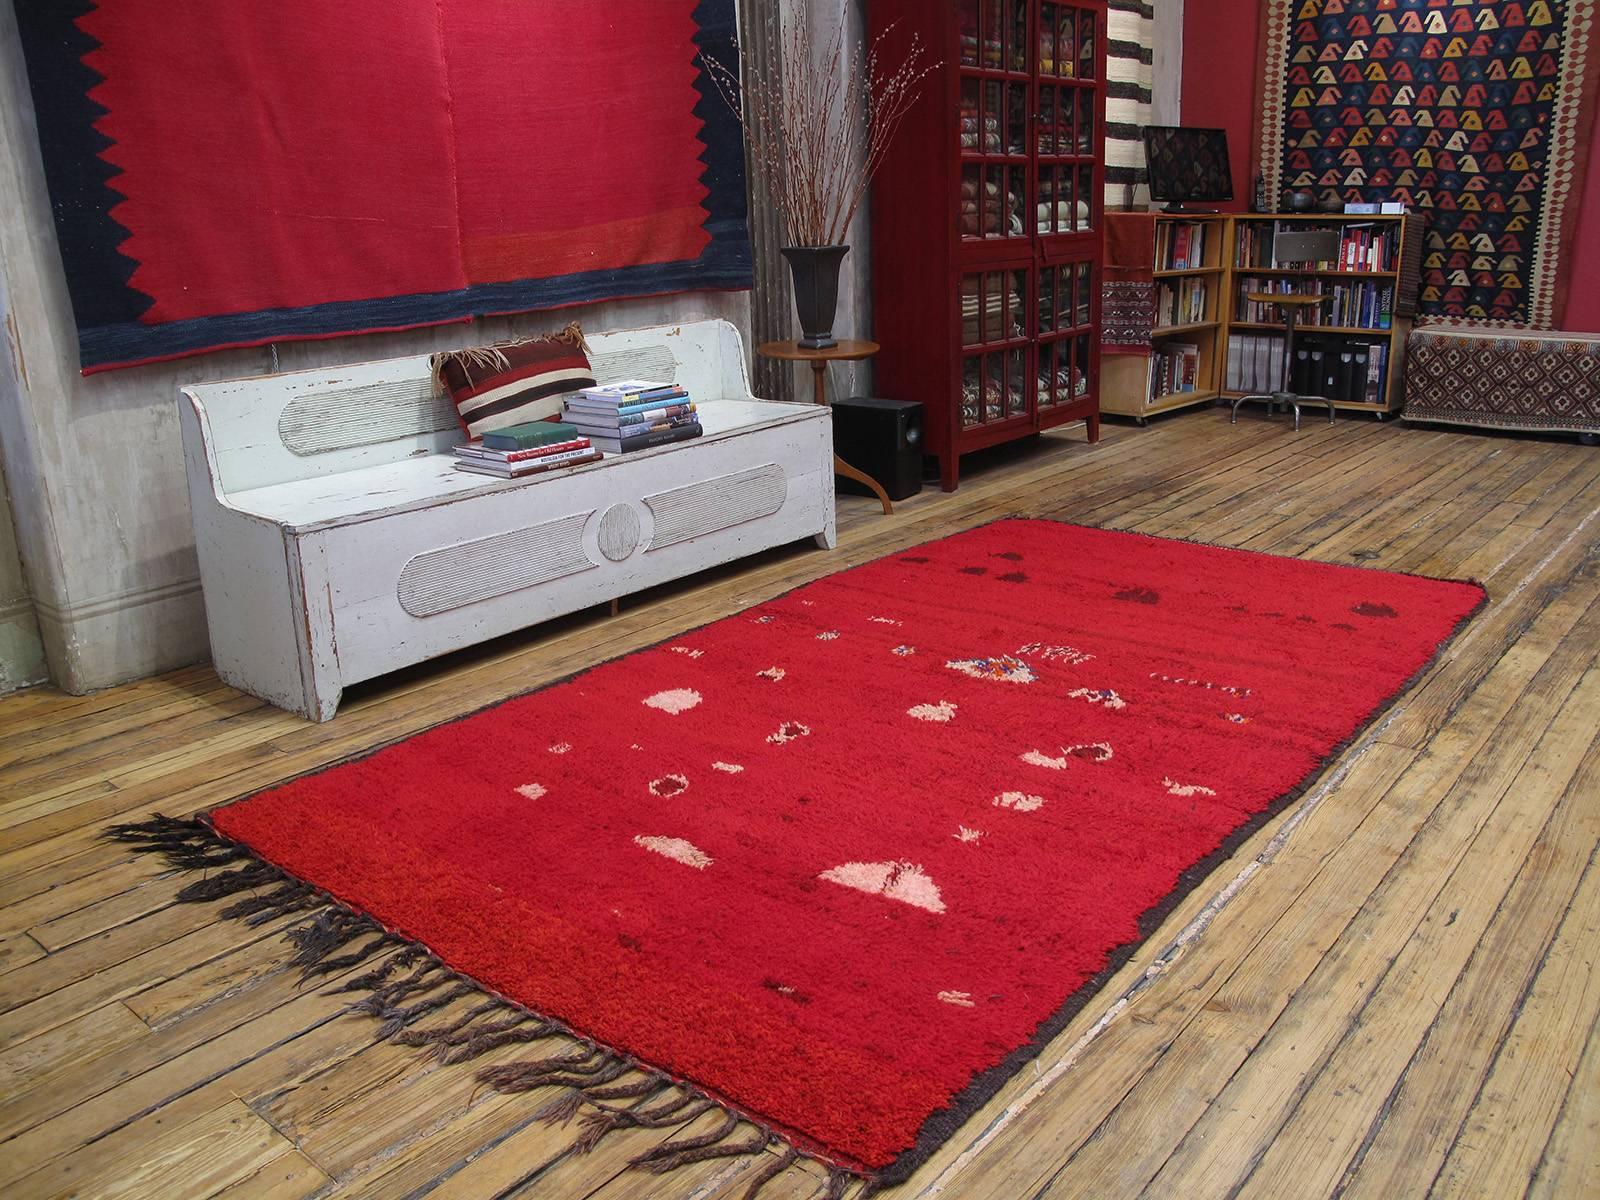 Rehamna Moroccan Berber rug. An old Moroccan rug from the region north of Marrakech, where the Berber aesthetic of the Atlas mountains meets the Arab culture of the coastal plains. Rug is an older example with intense red ground, decorated with